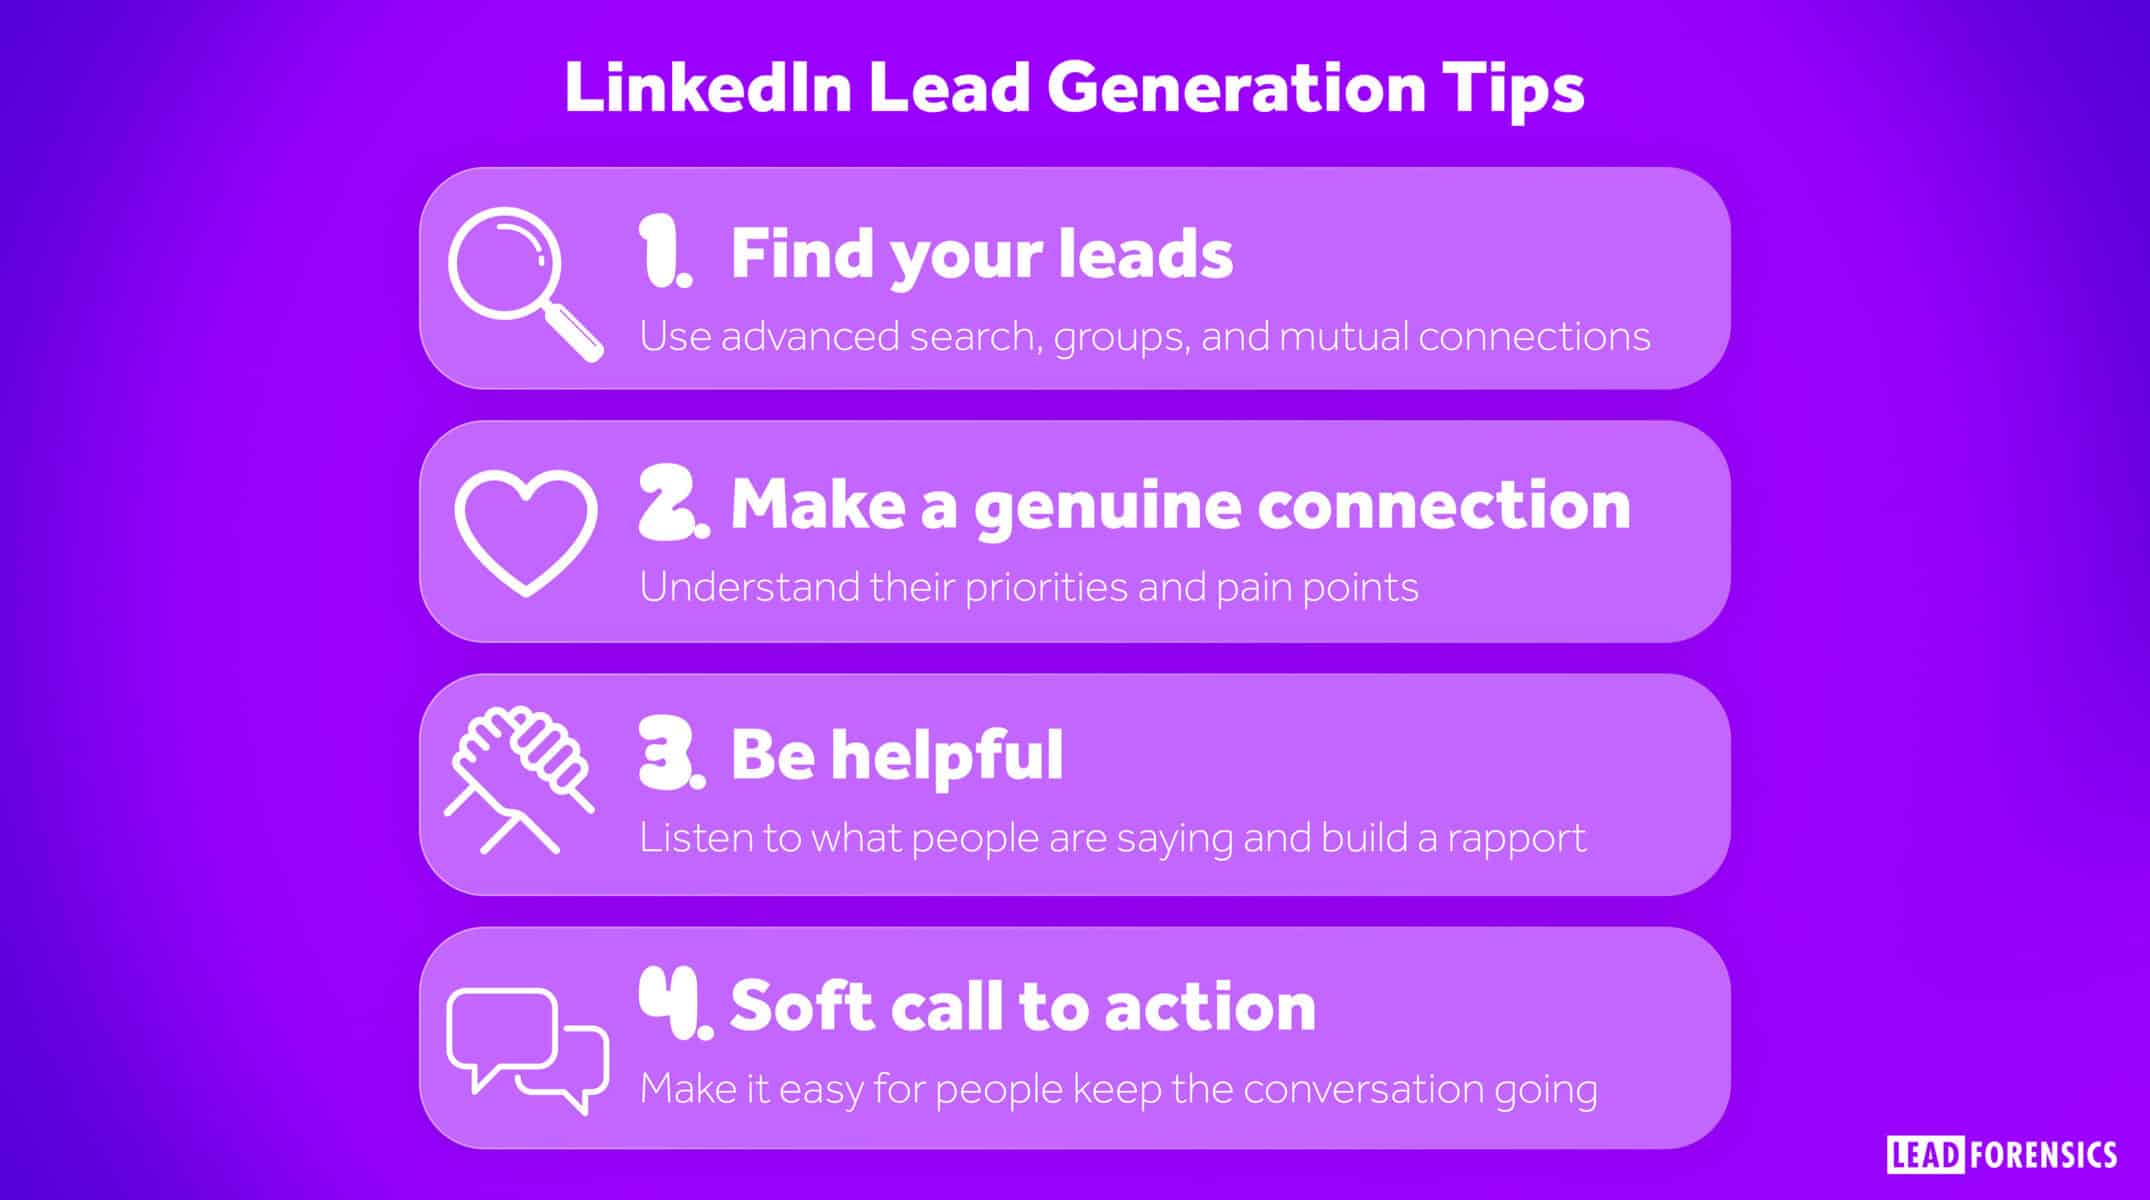 Find your leads - Use advanced search, groups, and mutual connections. Make a genuine connection - Understand their priorities and pain points. Be helpful - Listen to what people are saying and build a rapport. Soft call to action - Make it easy for people to keep the conversation going.